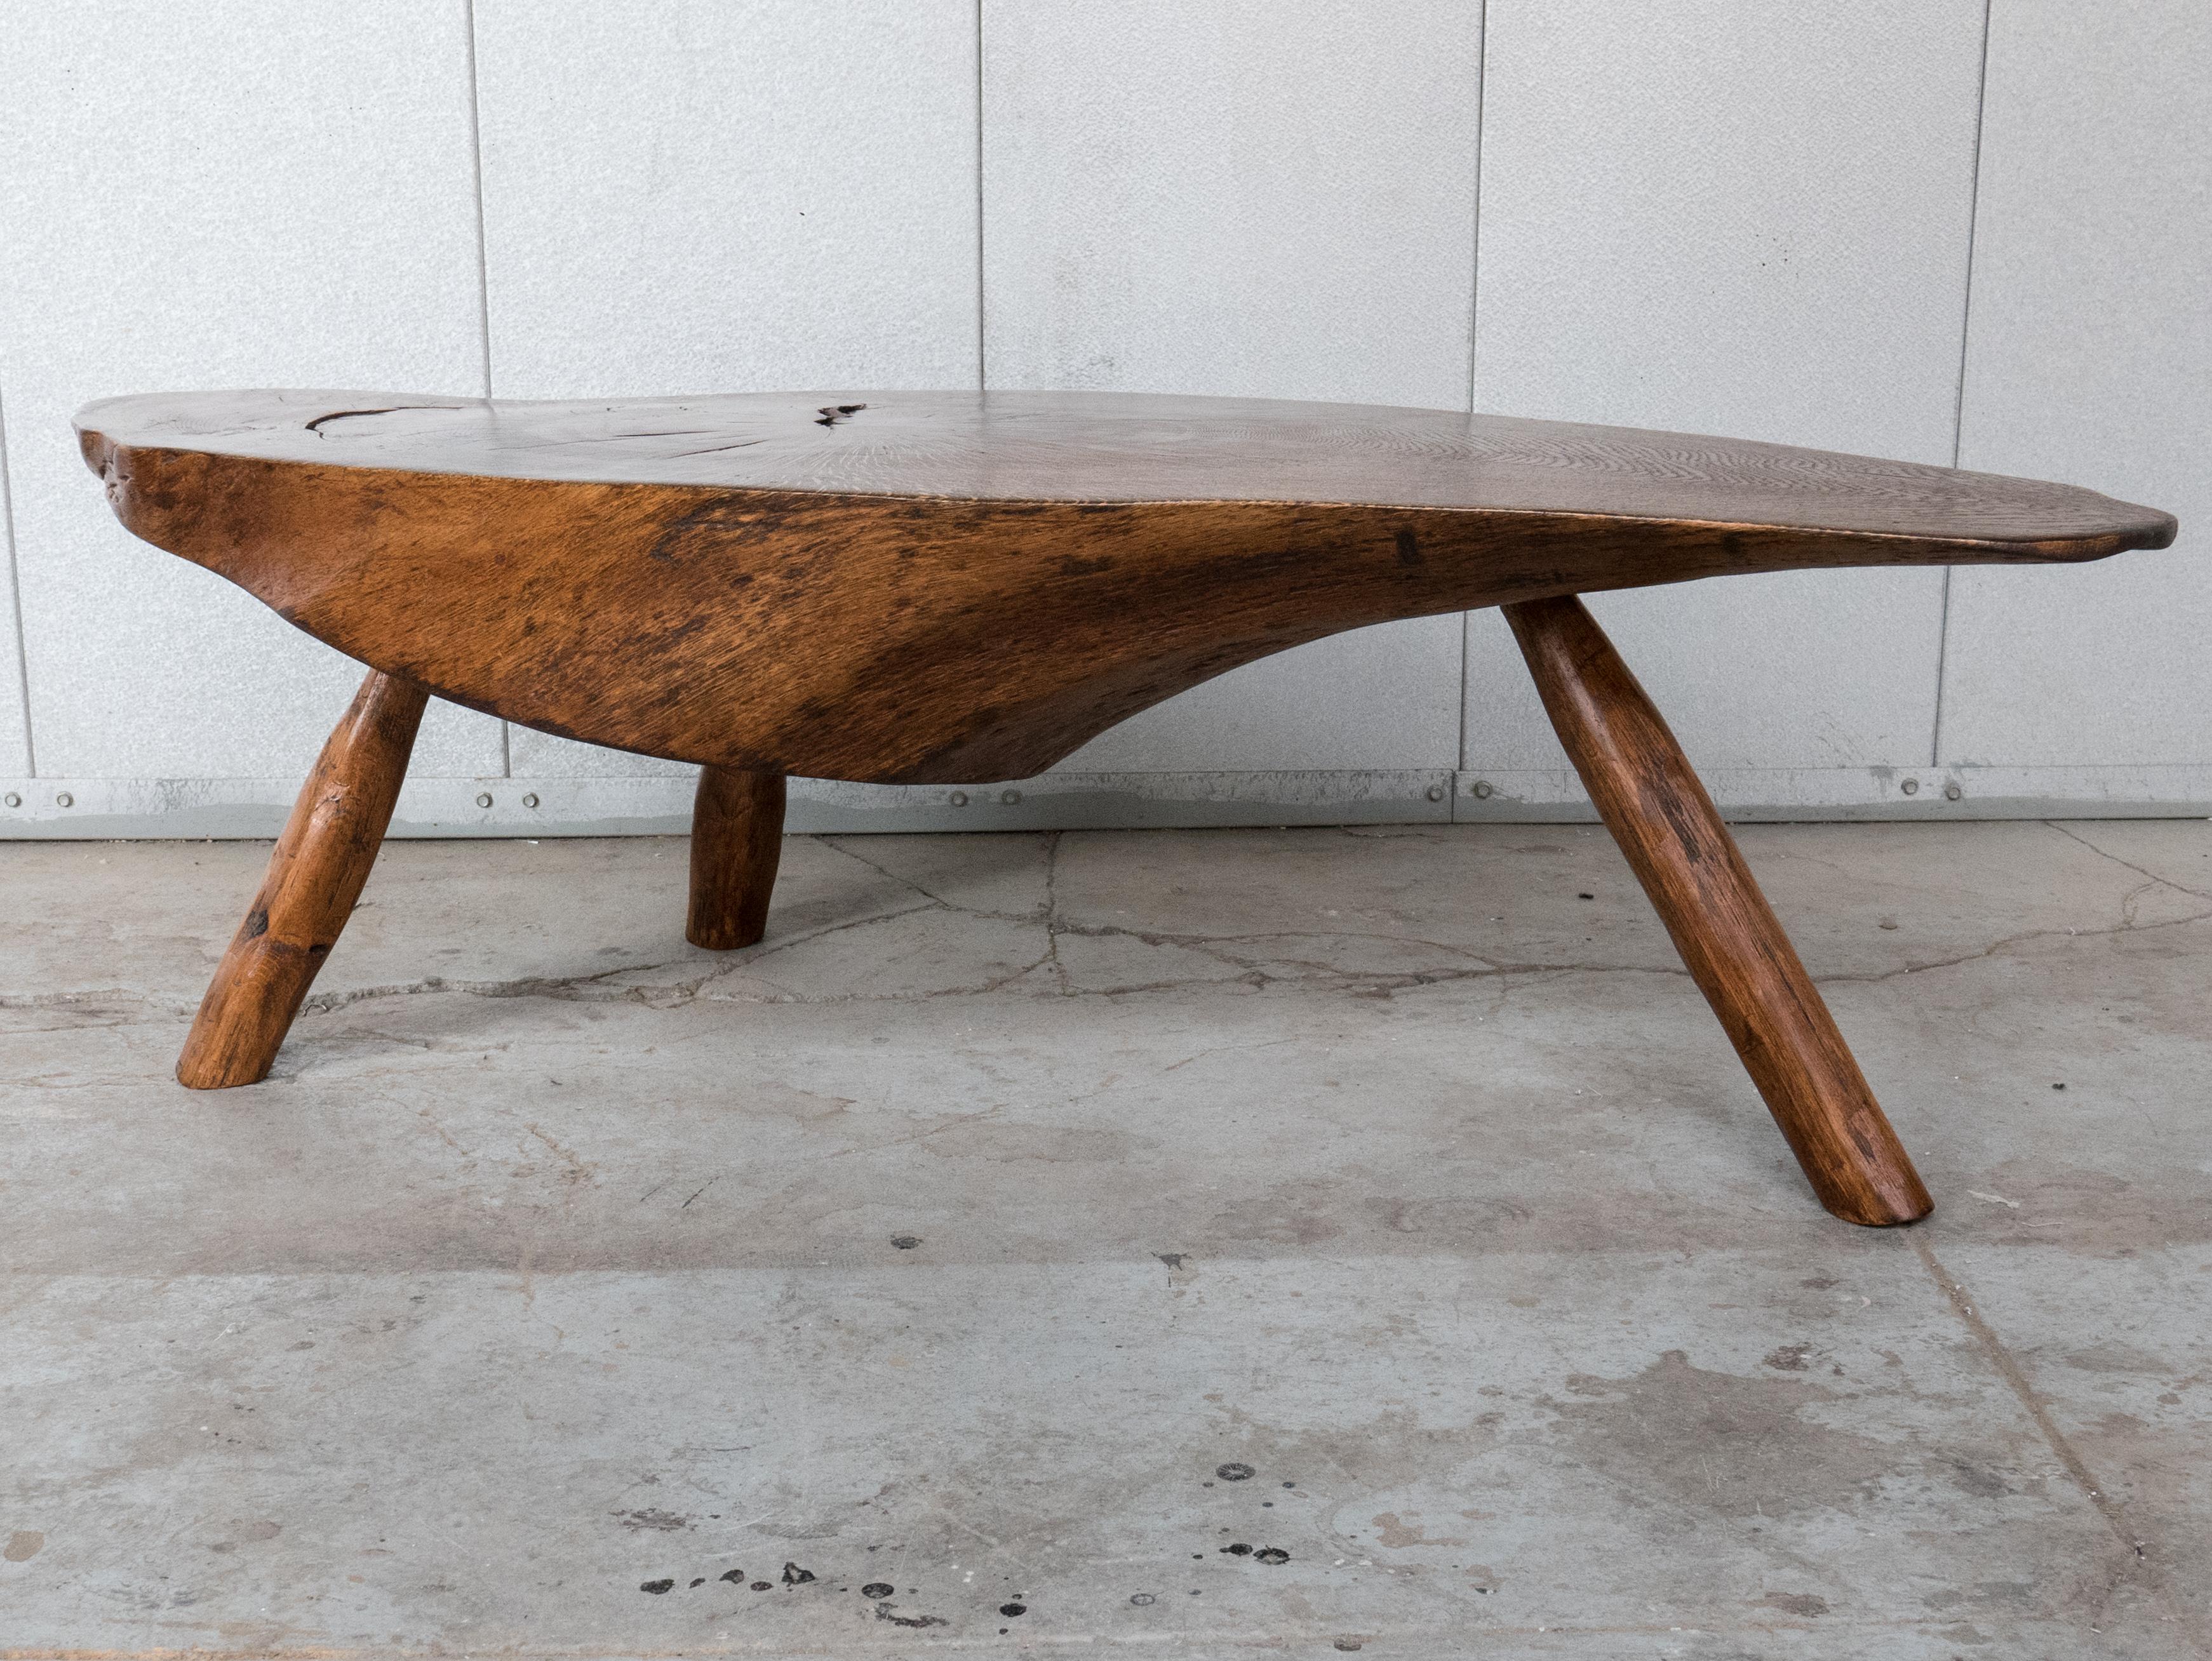 Live-edge cocktail table, made in Mexico, circa 1960s. The top is a cross-section of a nicely-grained guanacaste wood log; the whole is a modernist take on a vernacular design. Refinished.